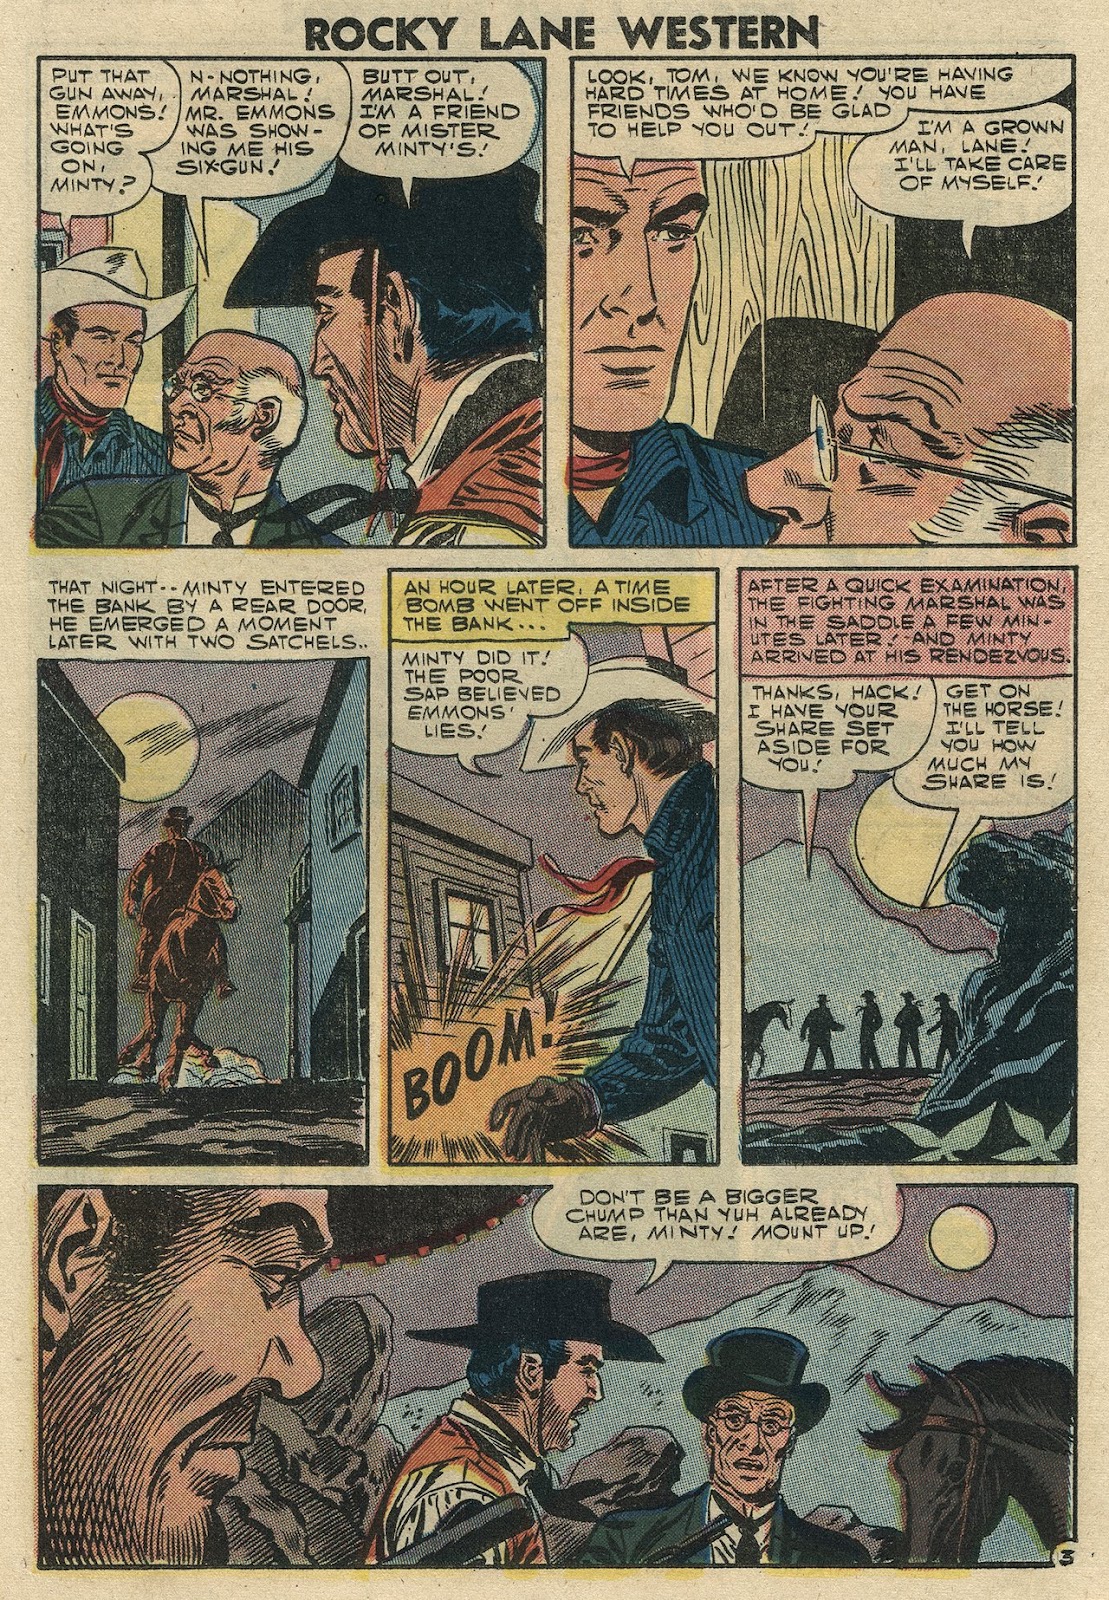 Rocky Lane Western (1954) issue 78 - Page 23